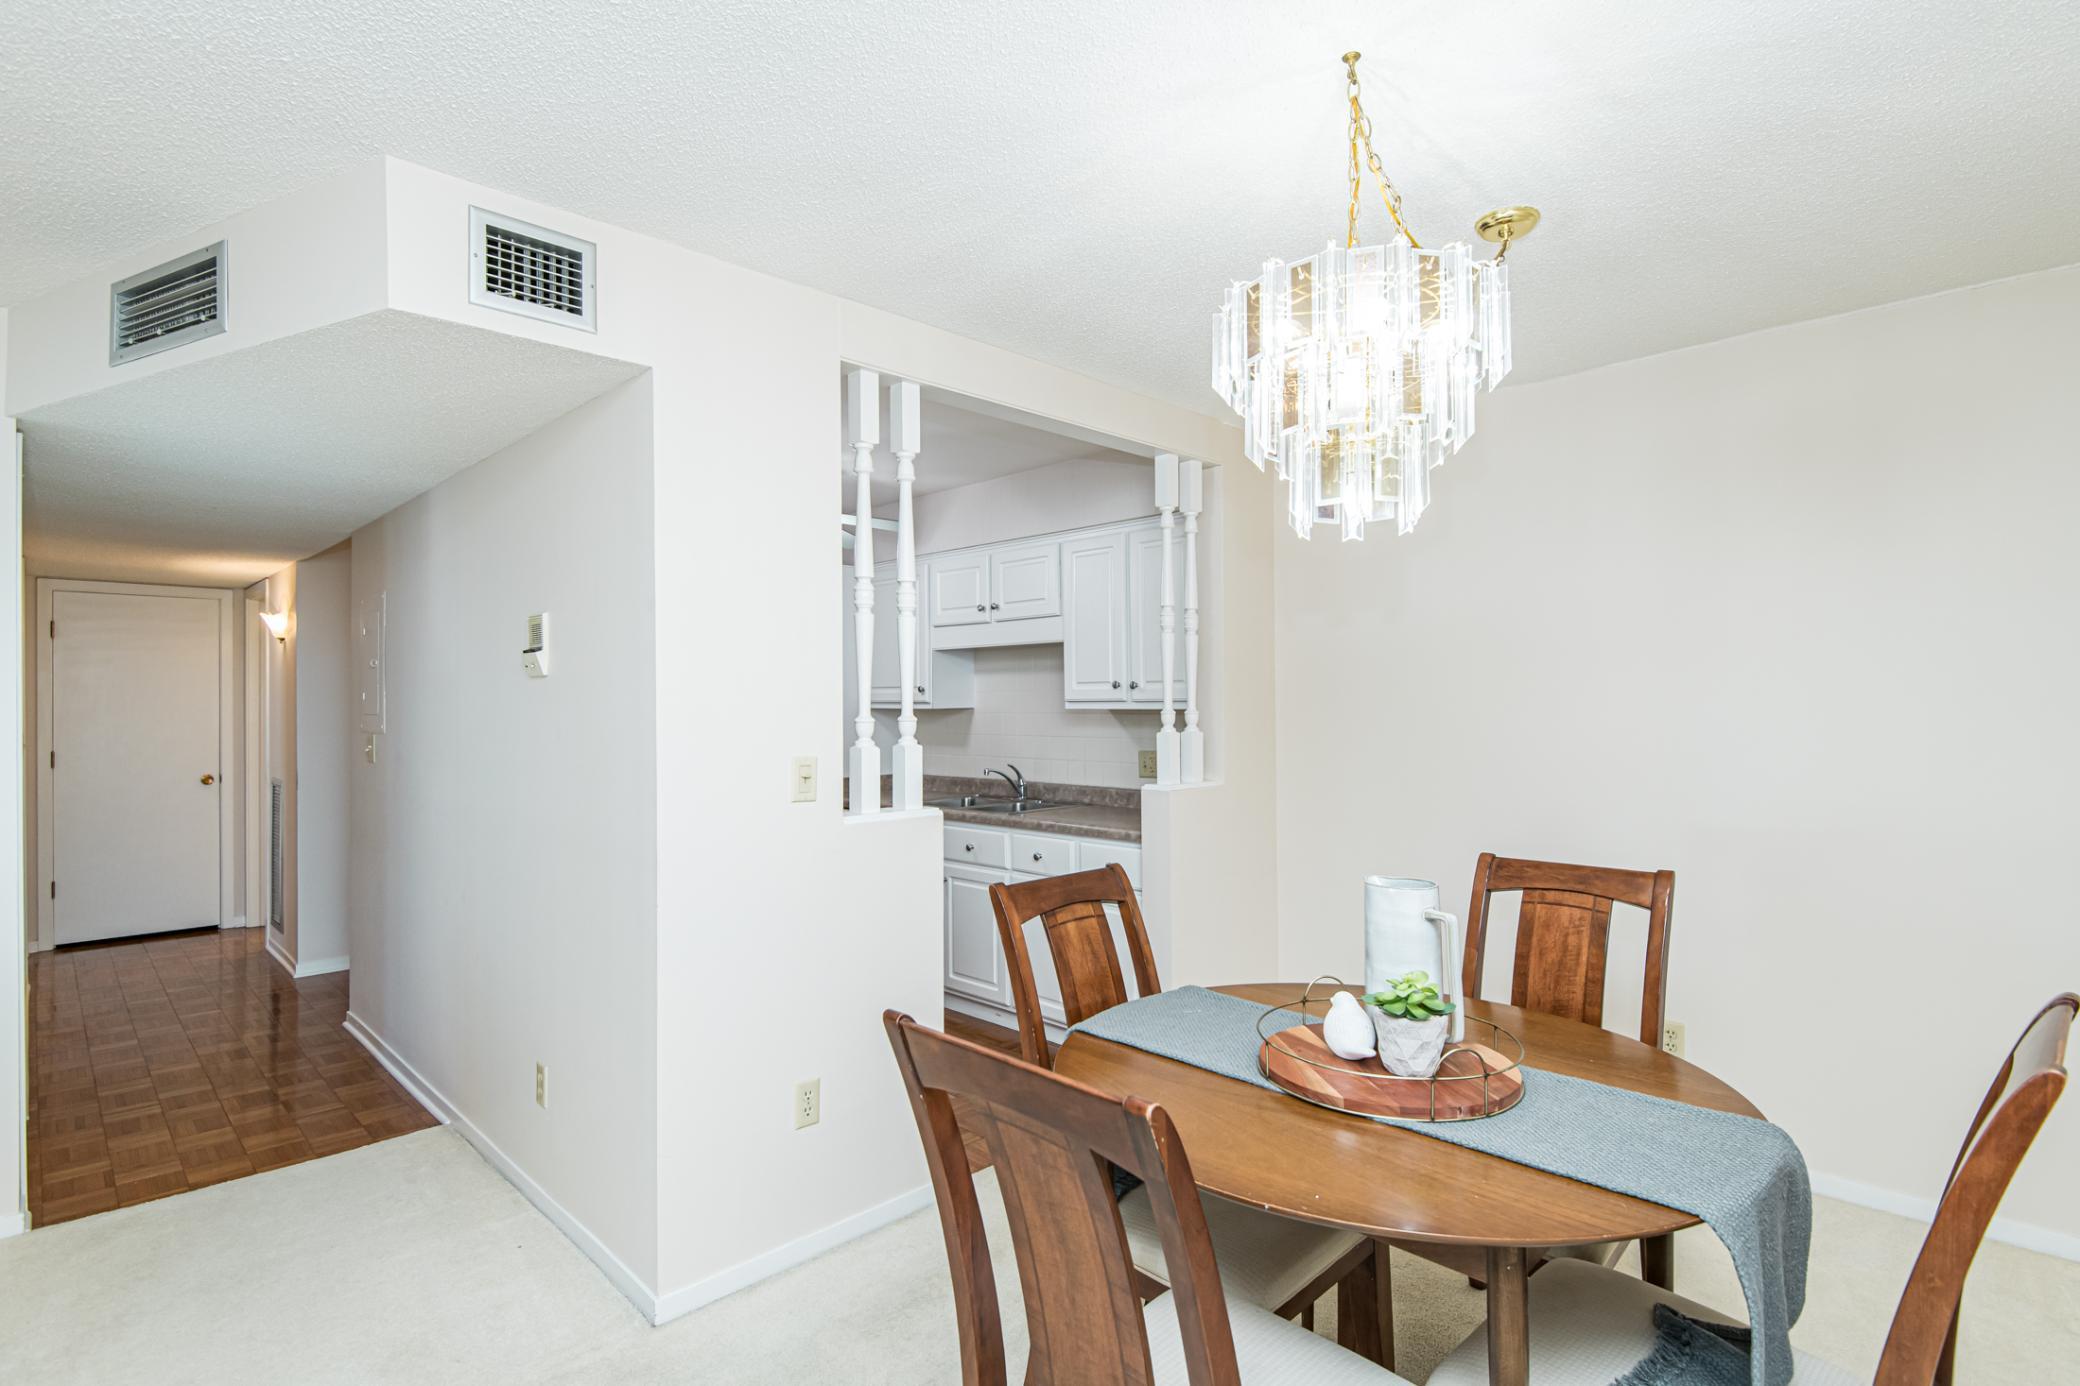 Easy access from the kitchen to your table!